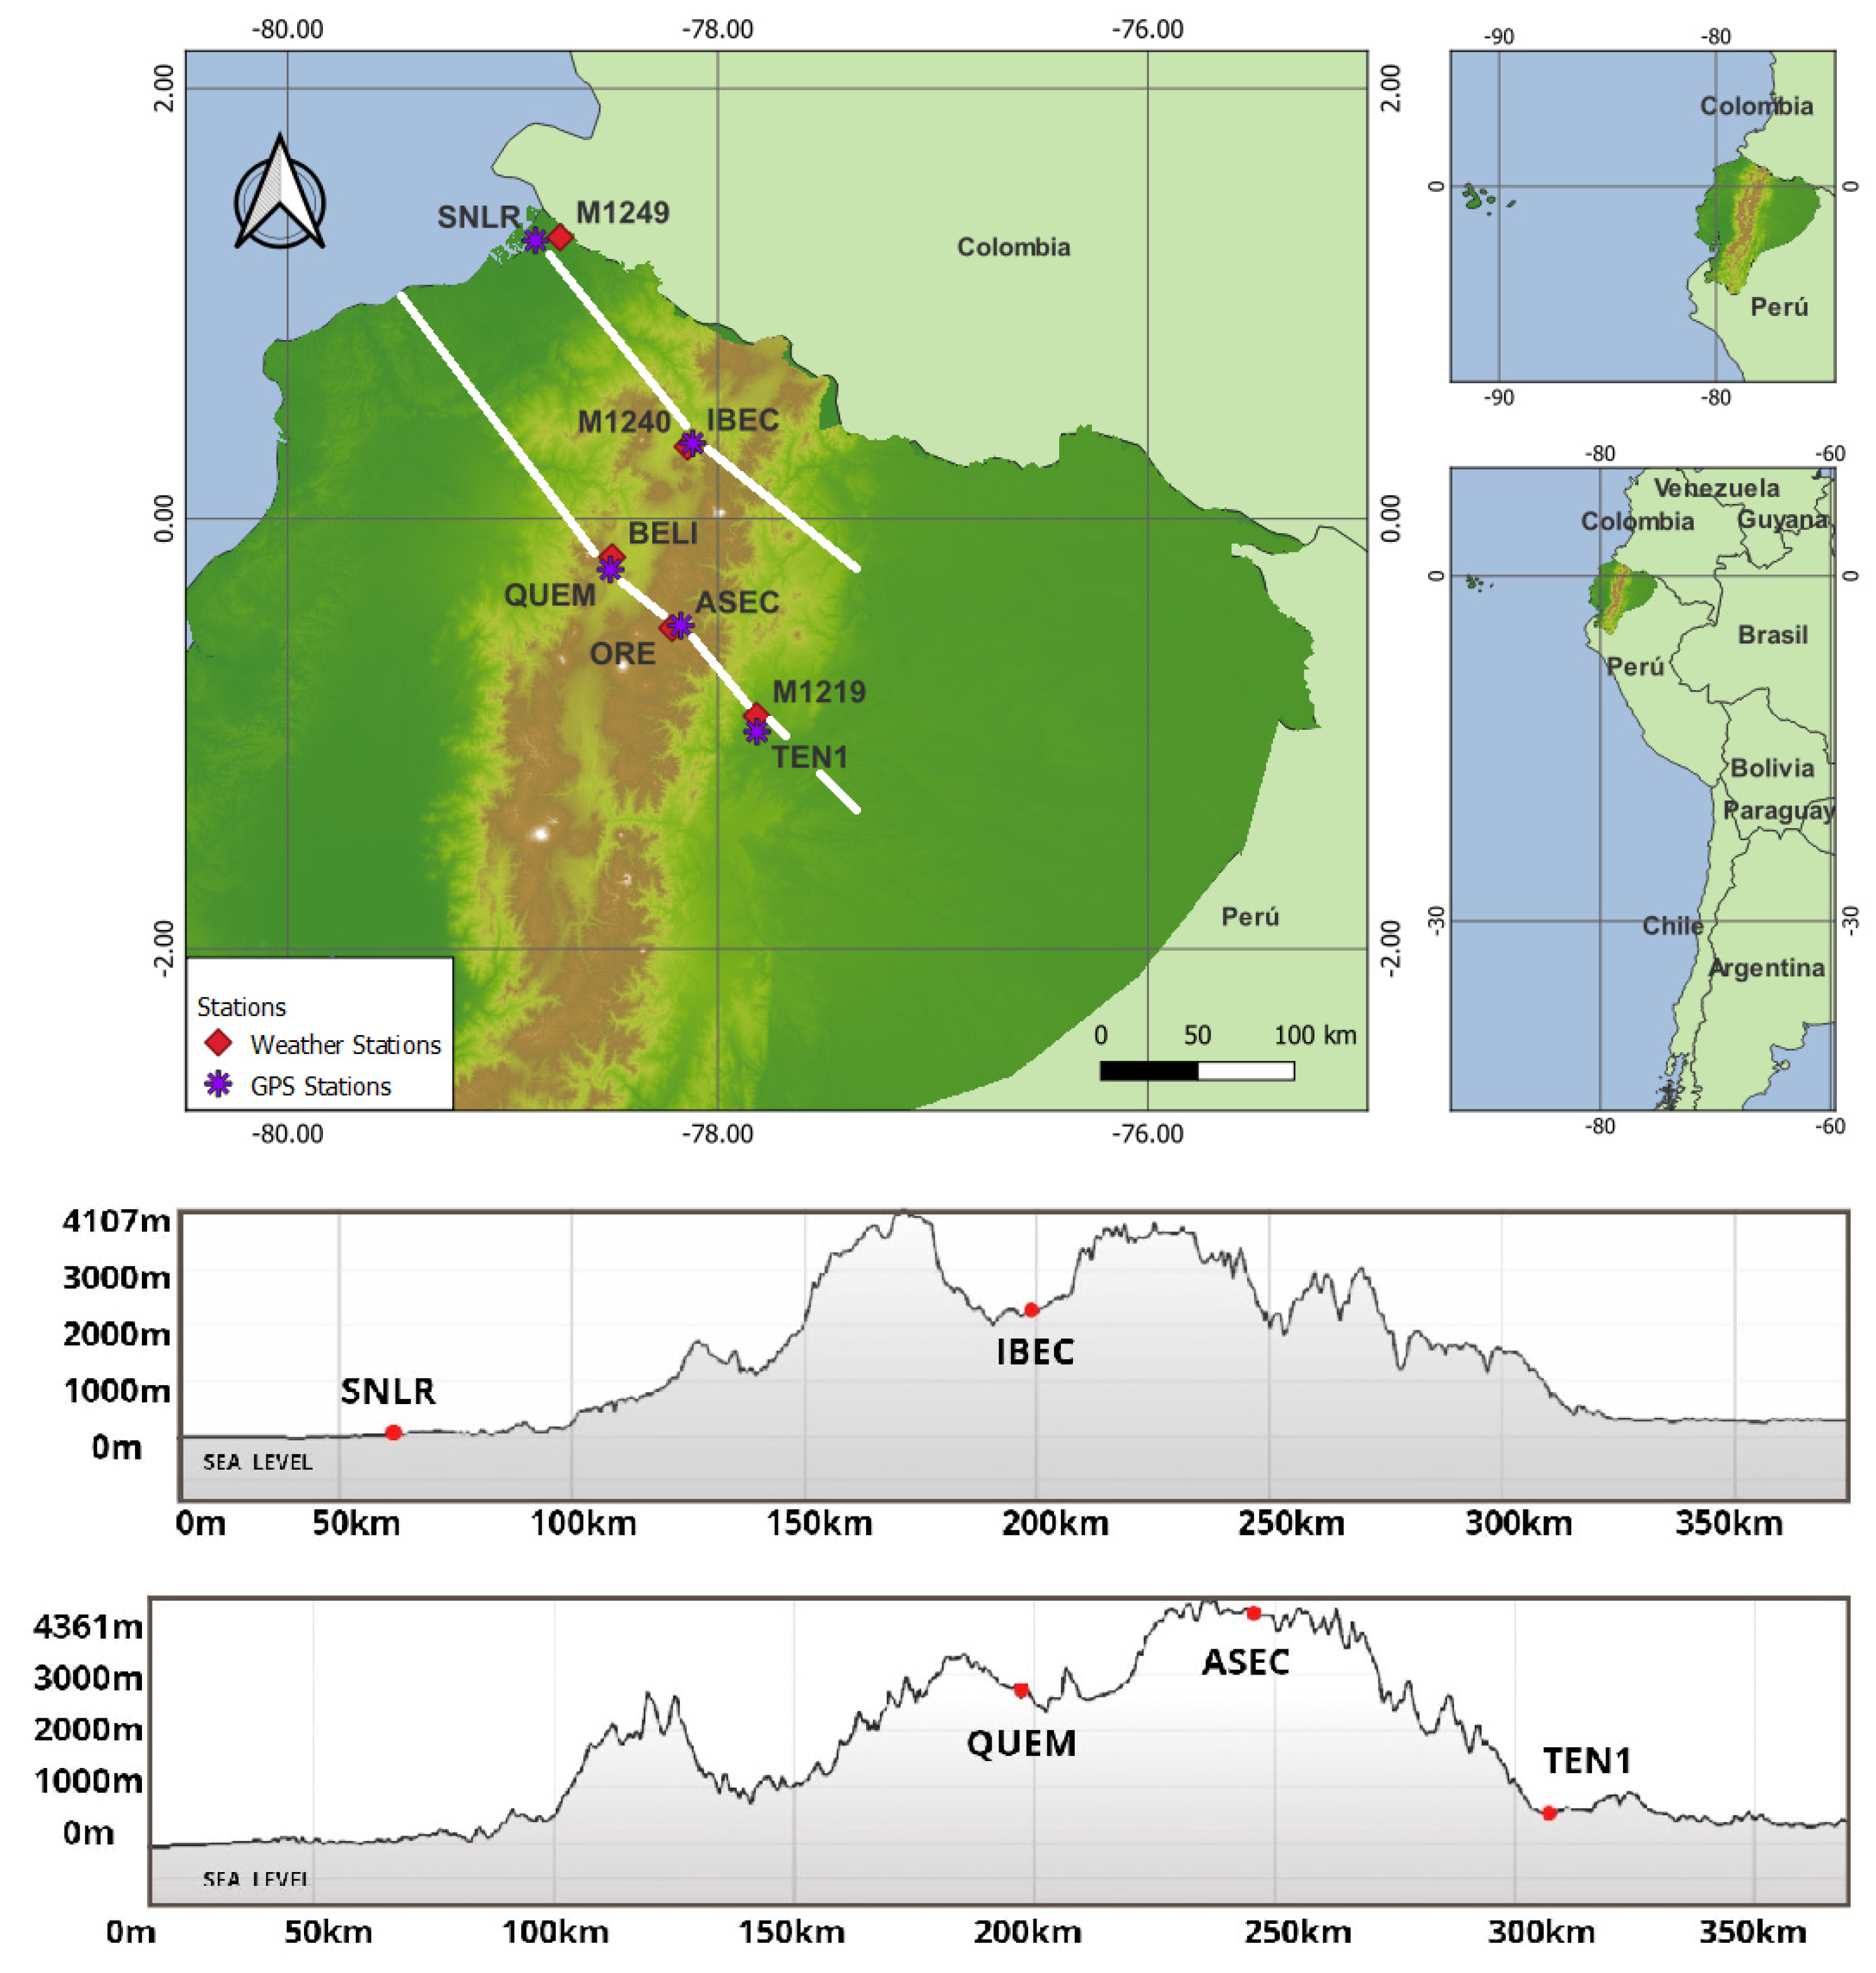 Atmosphere | Free Full-Text | Harmonic Analysis of the Relationship between  GNSS Precipitable Water Vapor and Heavy Rainfall over the Northwest  Equatorial Coast, Andes, and Amazon Regions